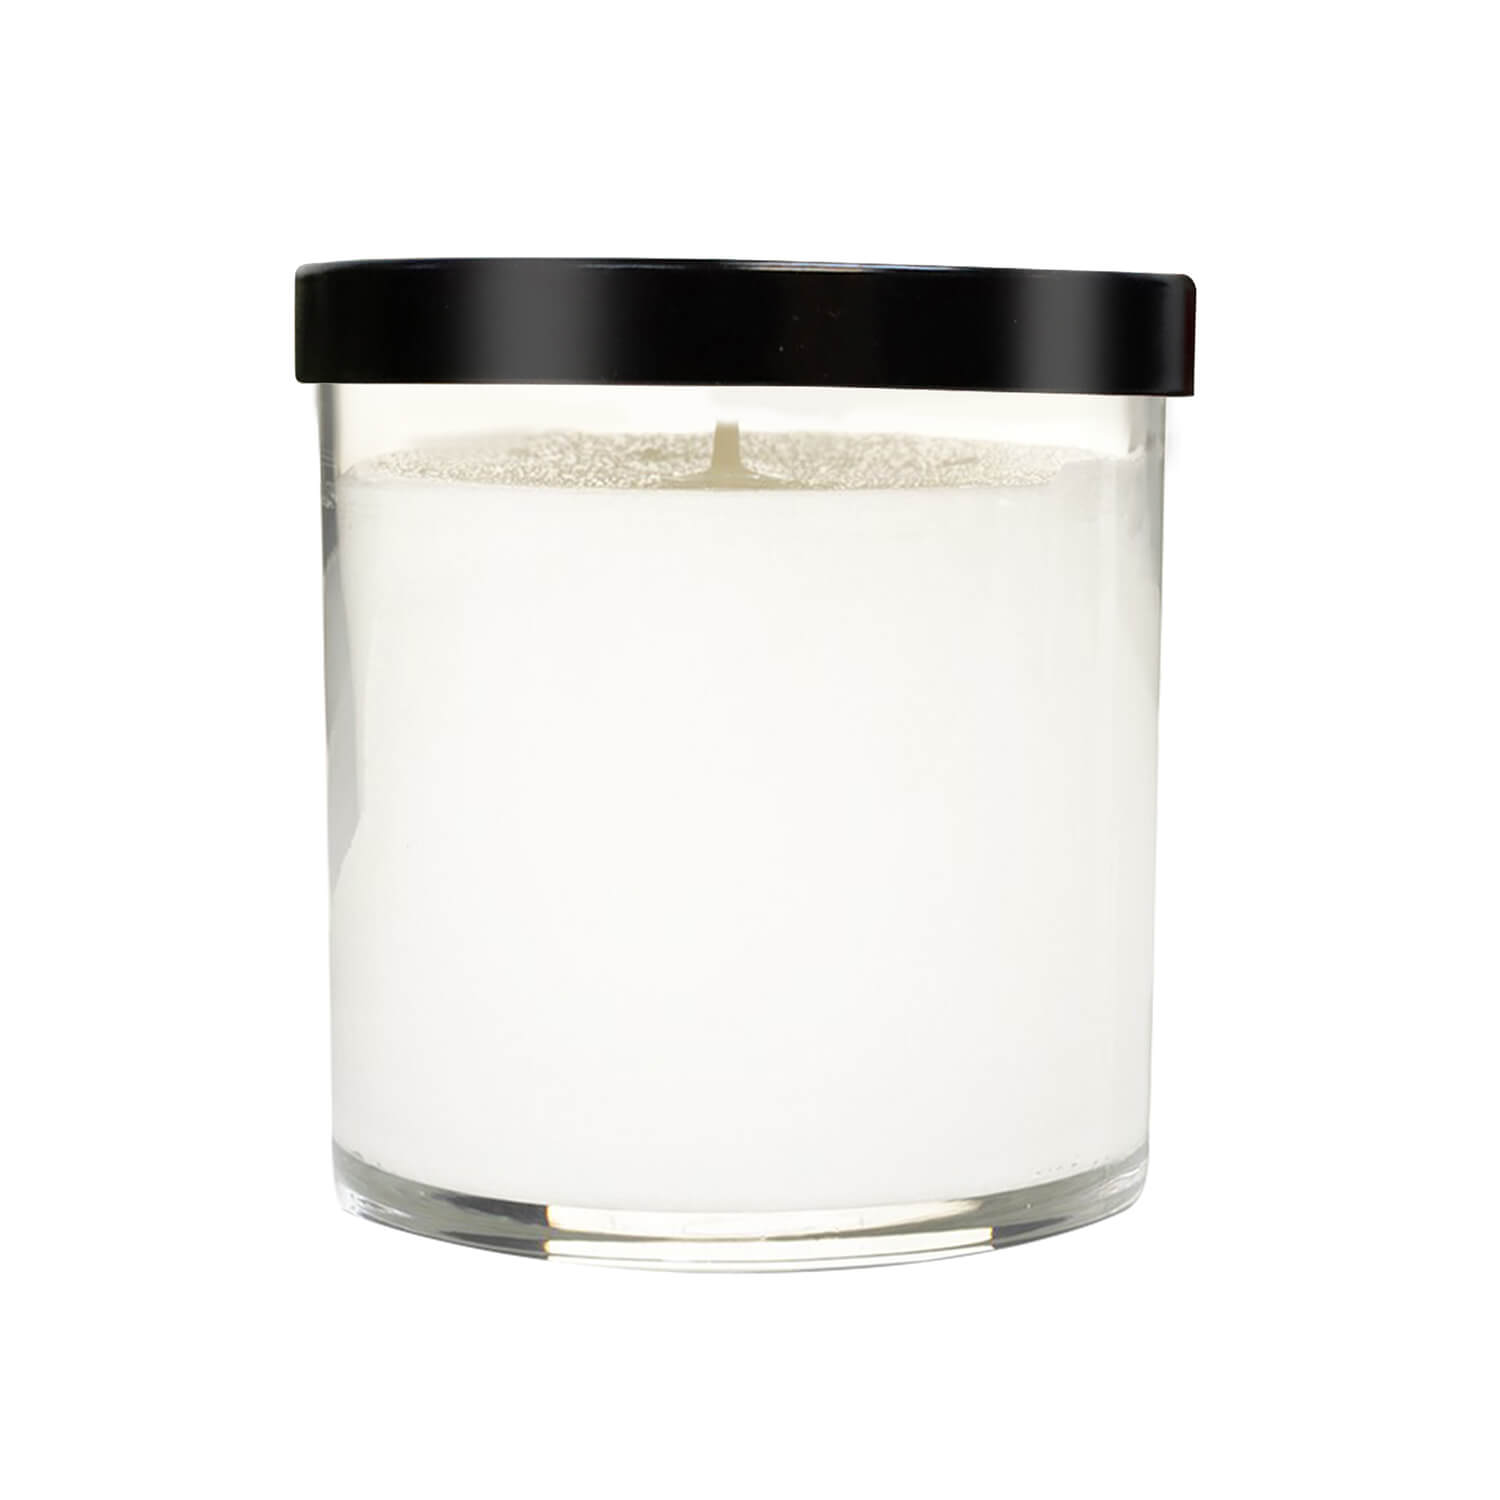 A Clear Glass Tumbler Photo Candle with a black lid on a white background.